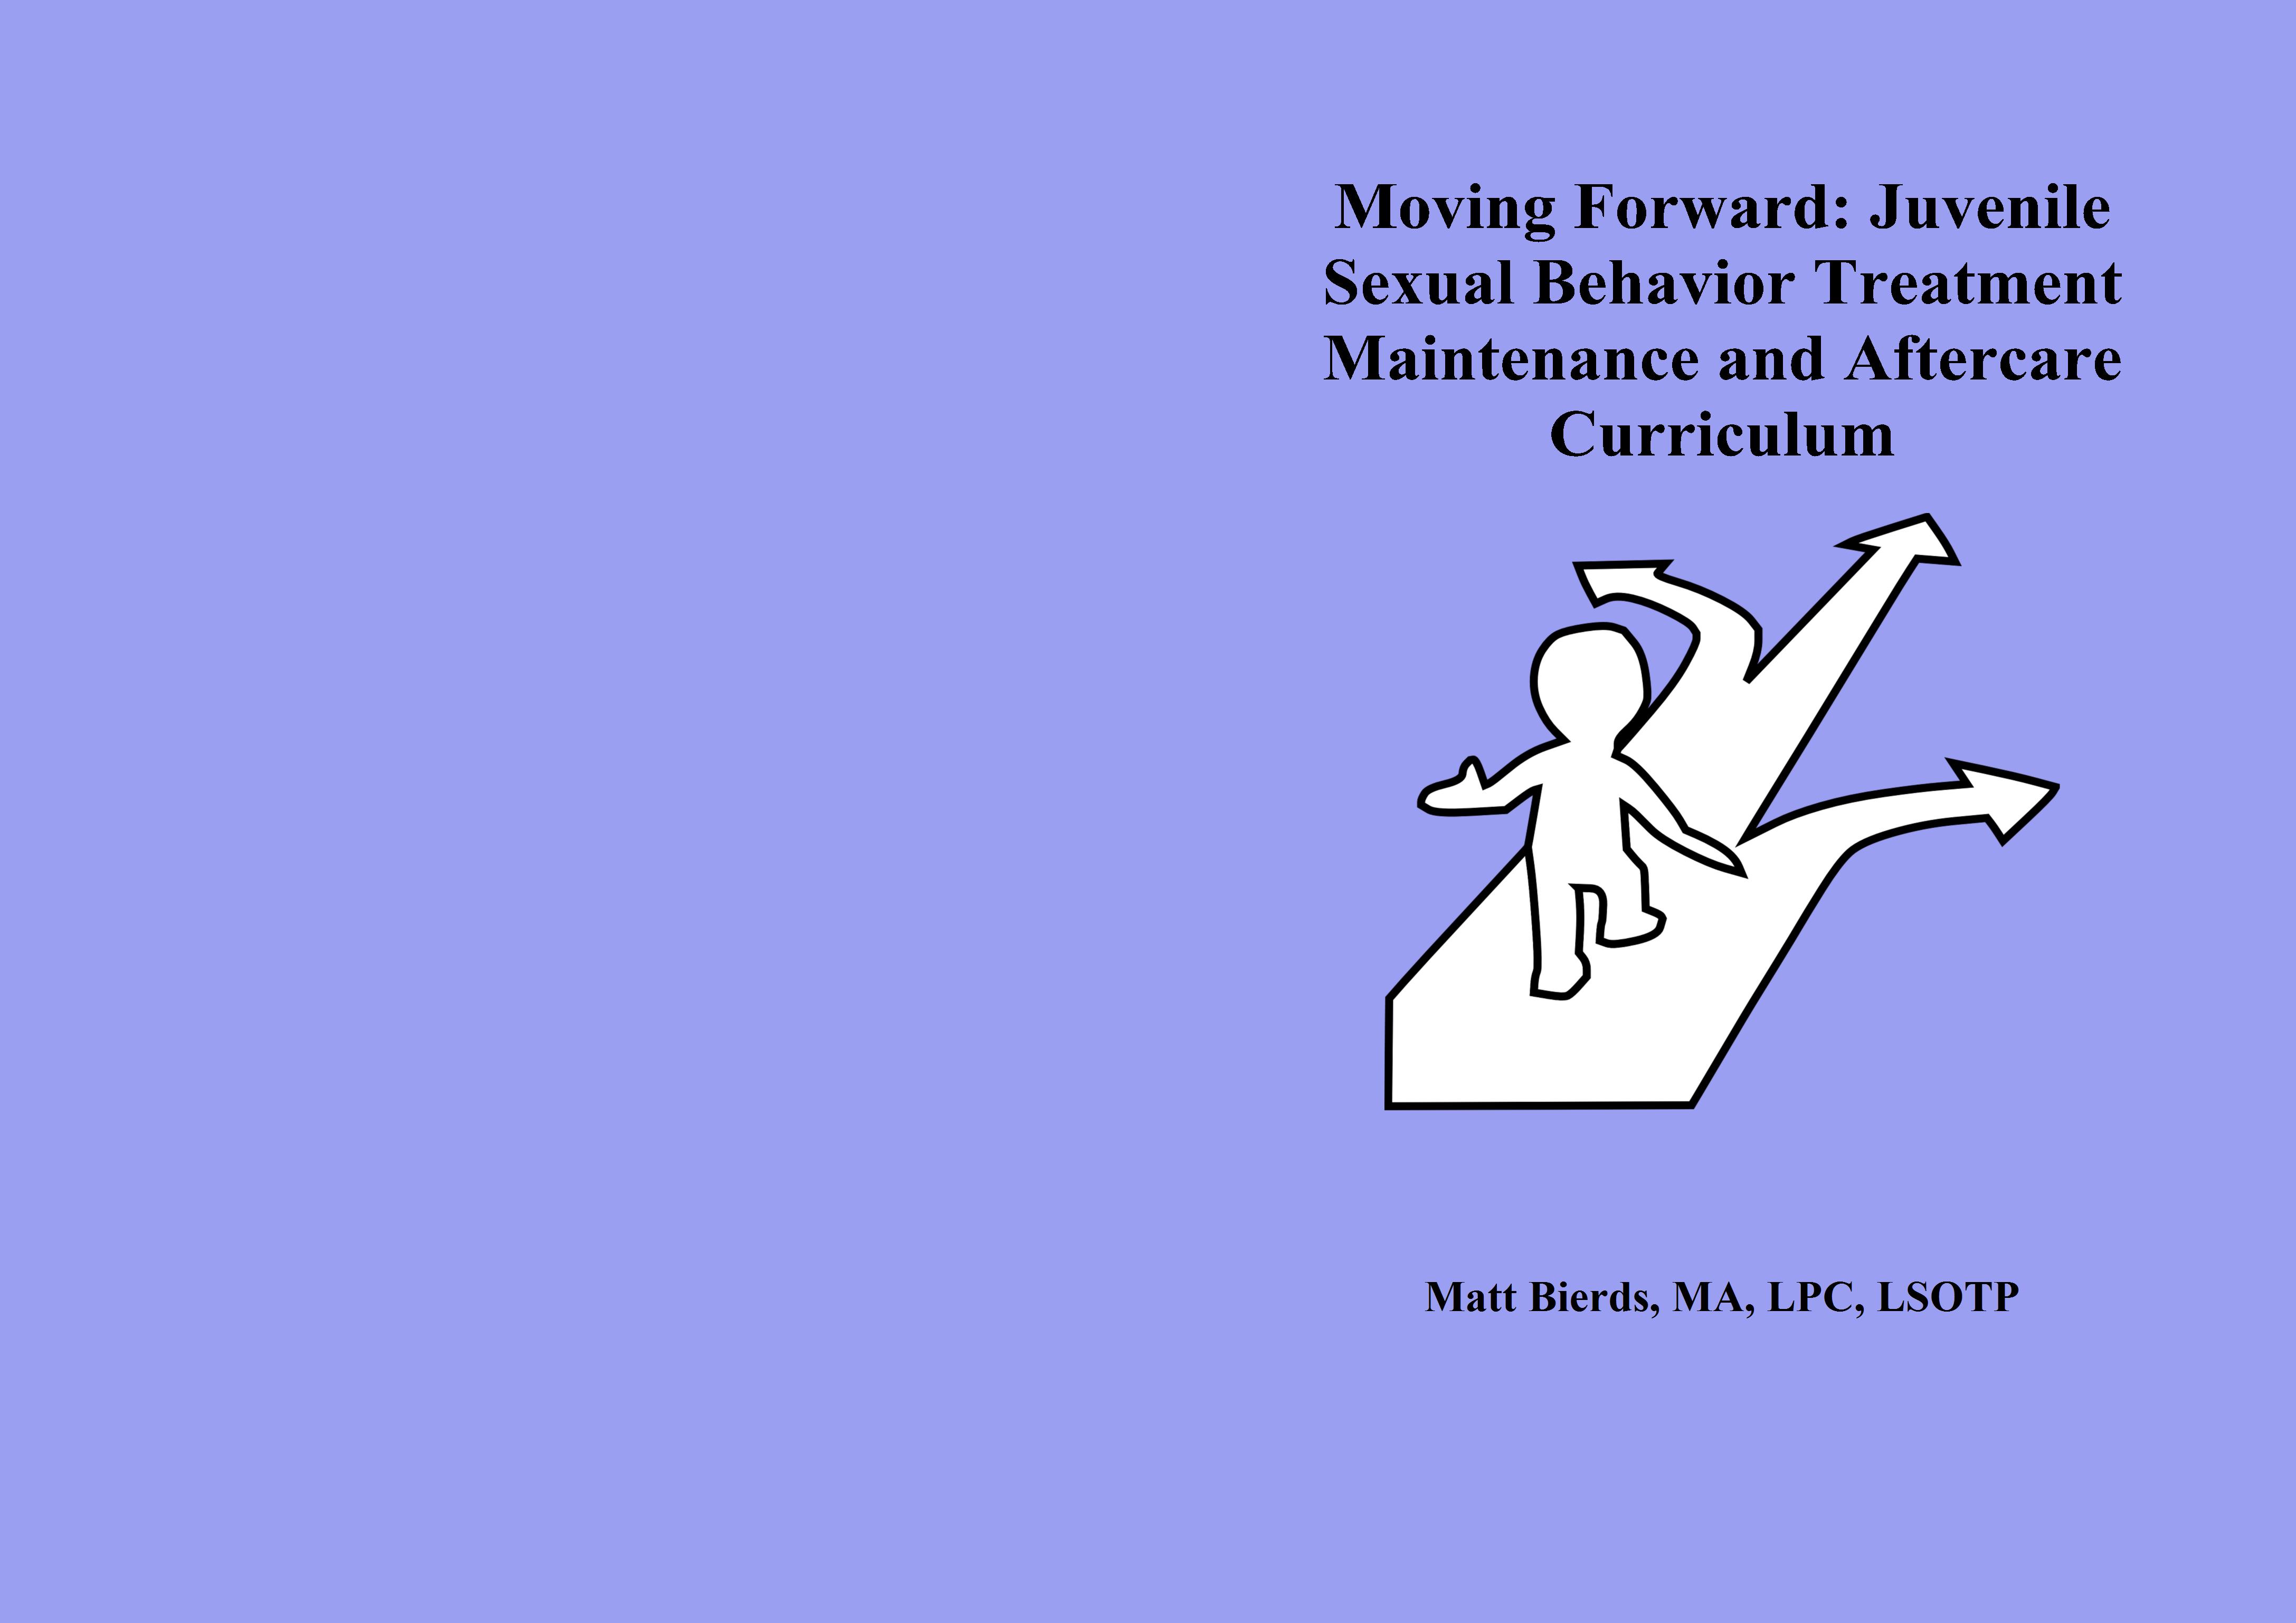 Moving Forward: Juvenile Sexual Behavior Treatment Maintenance and Aftercare Curriculum cover image